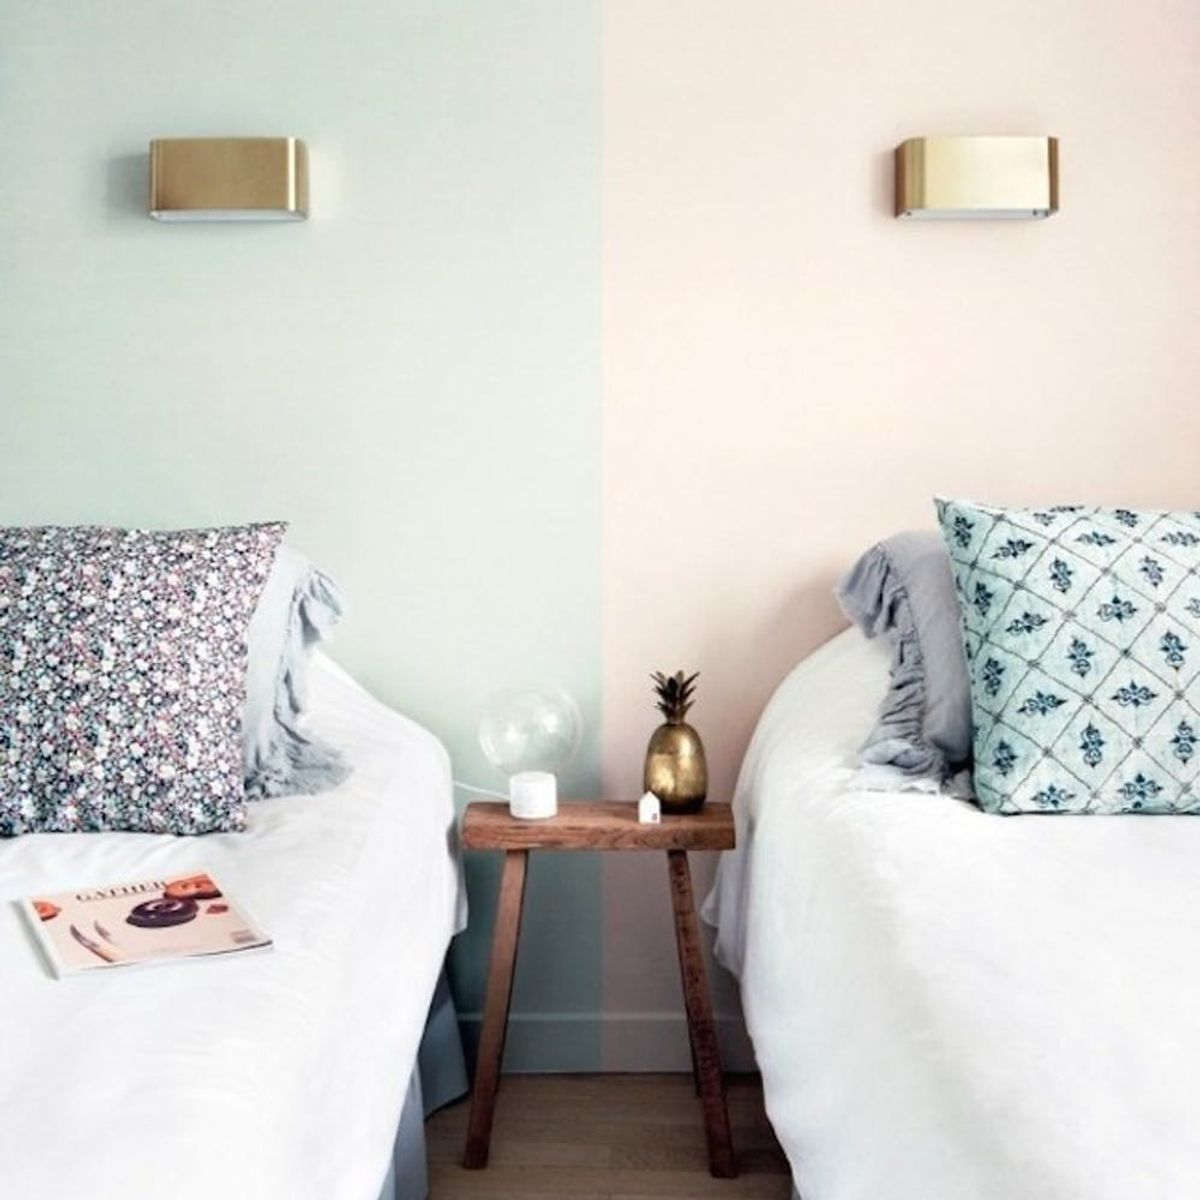 20 Tiny Hotel Rooms That Nailed the Whole Small Space Trend